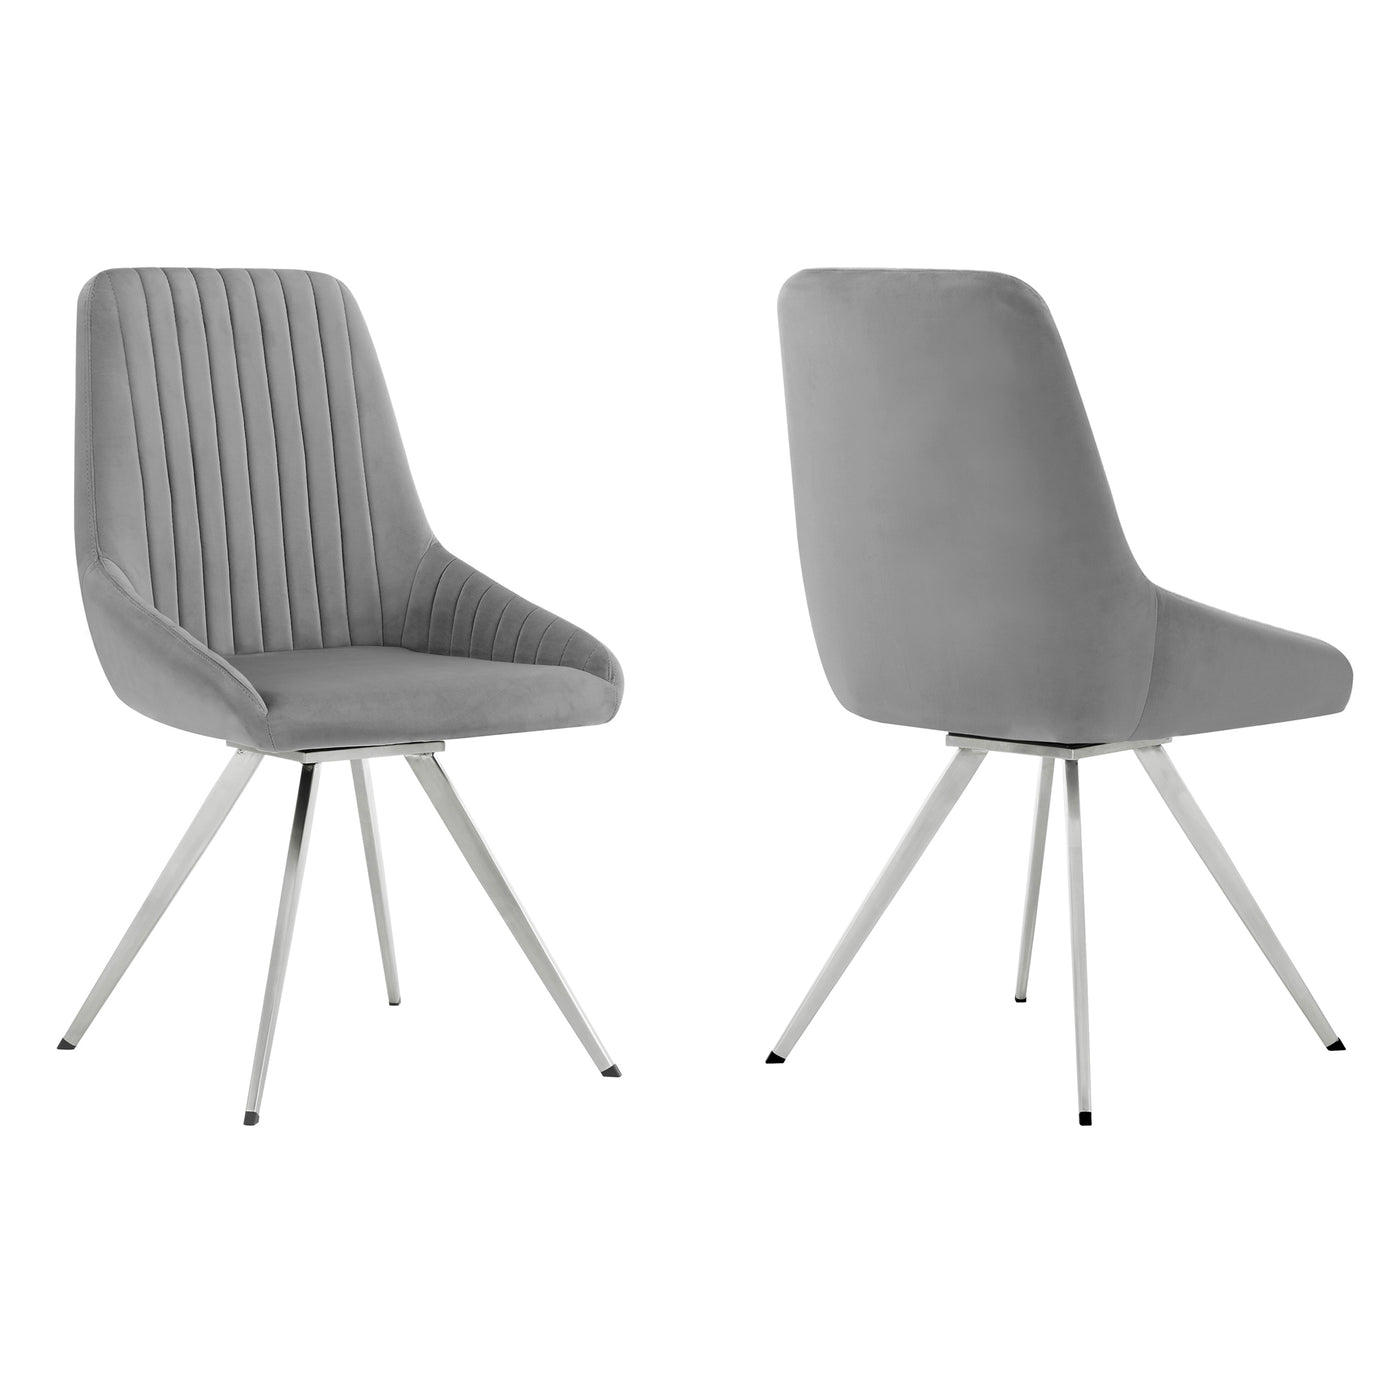 Skye Dining Chair Set of 2